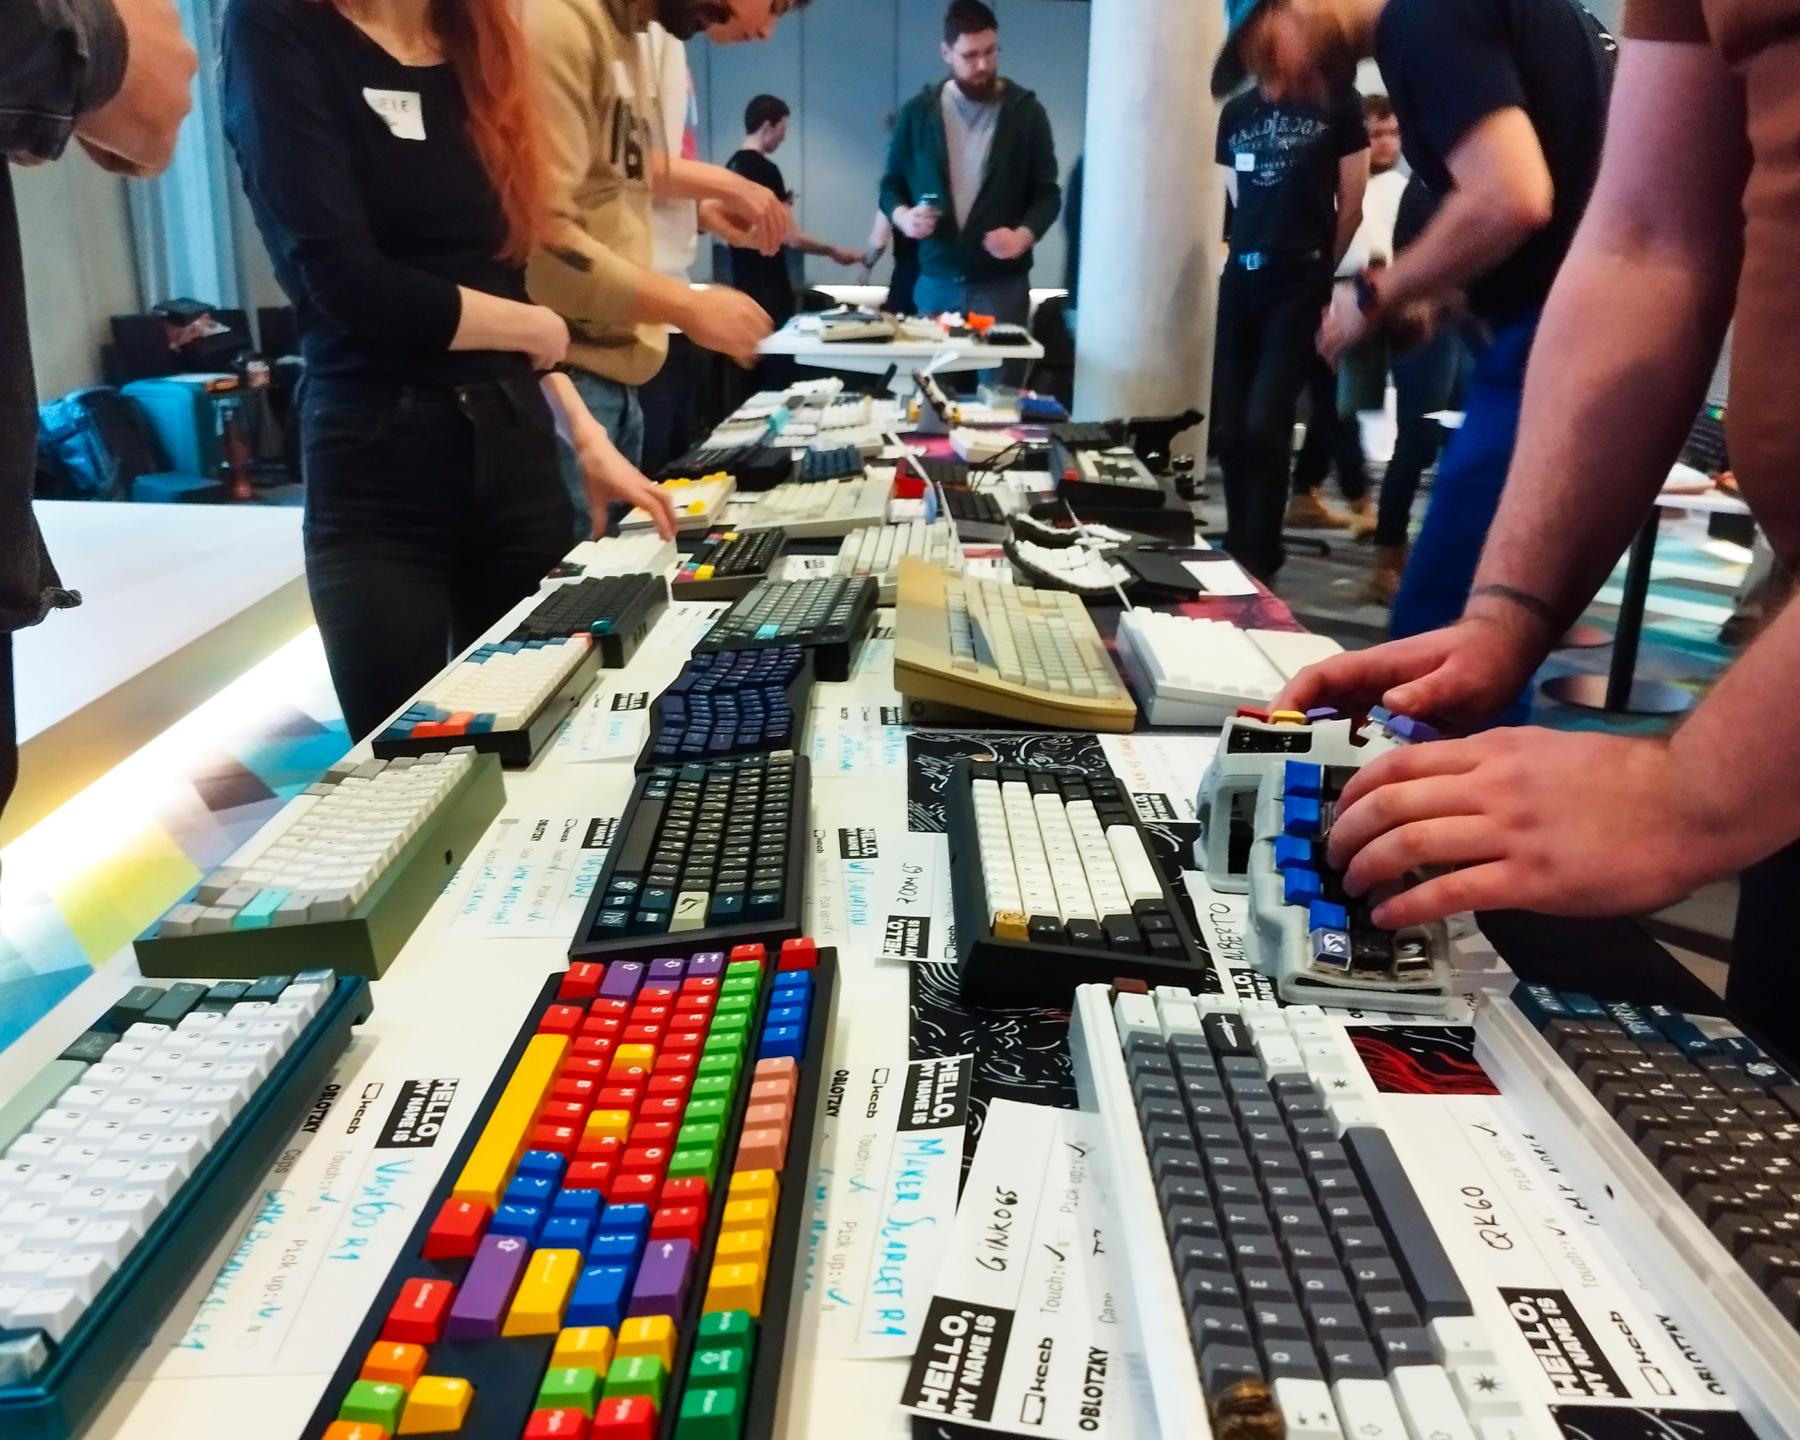 Overview of keyboards.